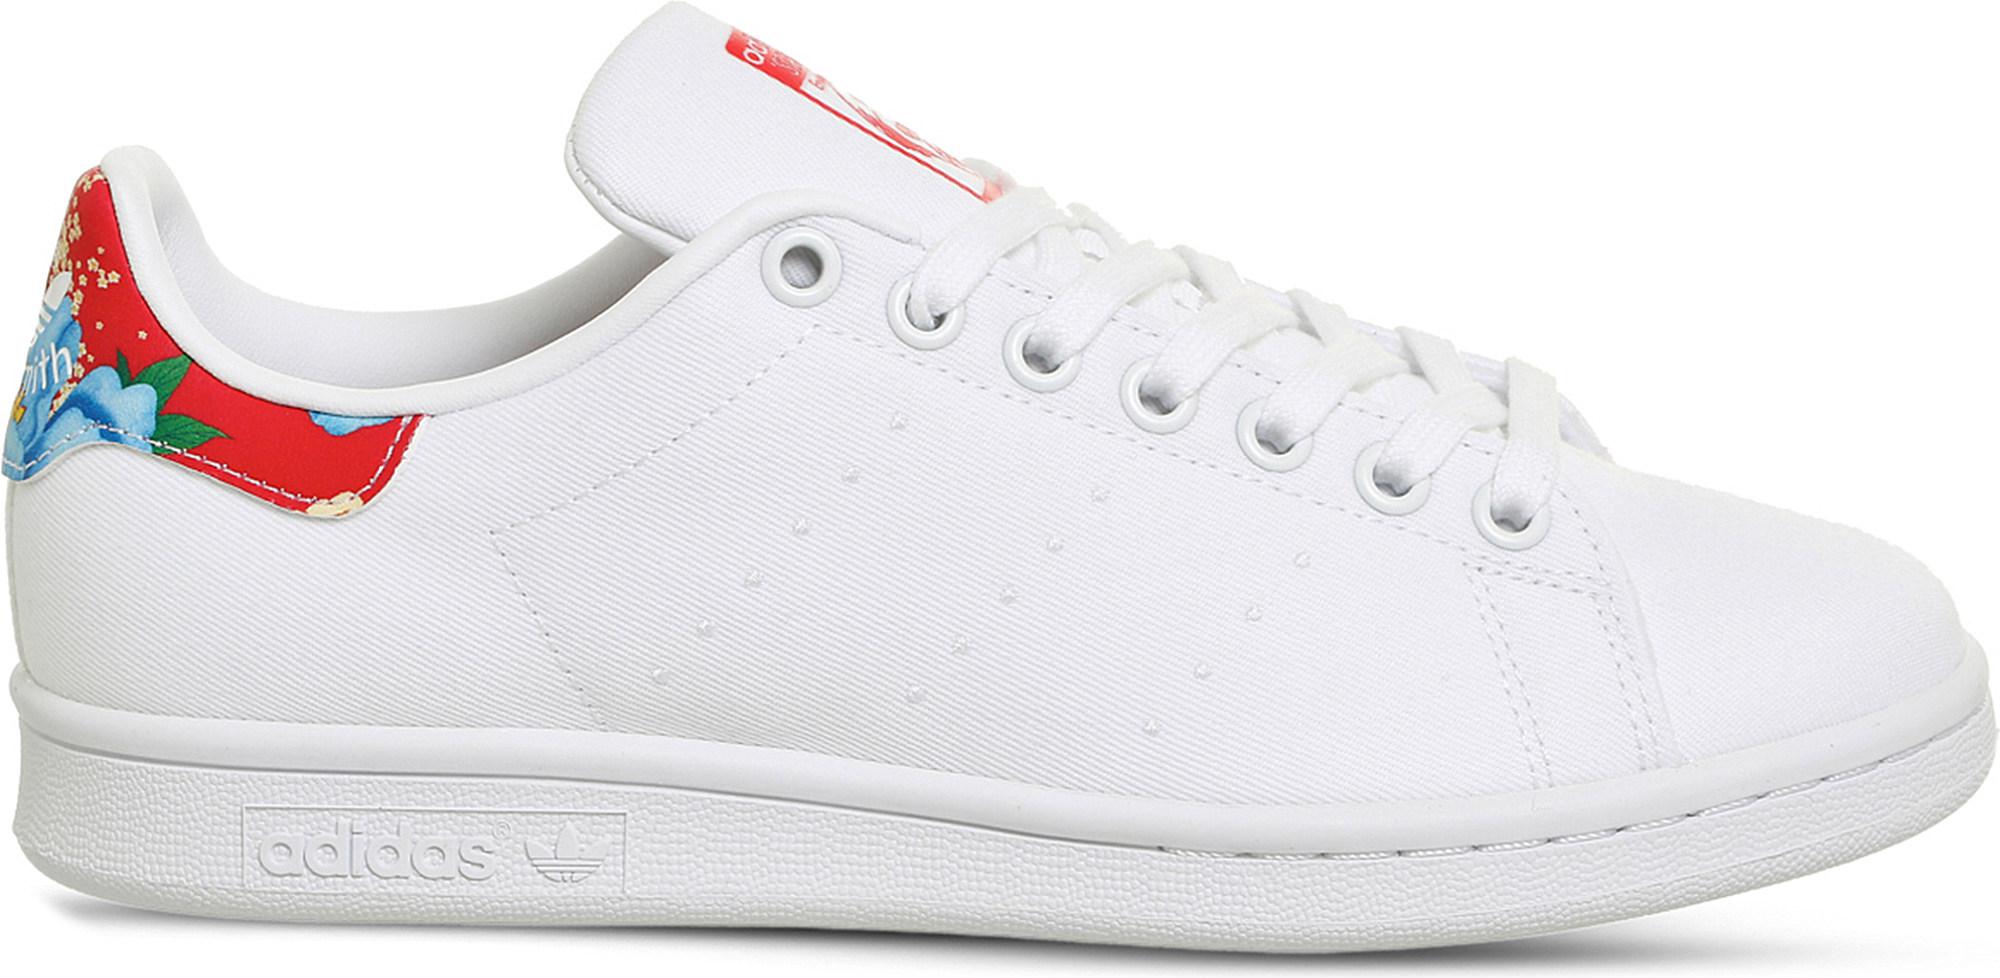 adidas Originals Stan Smith Floral Canvas Trainers in White | Lyst